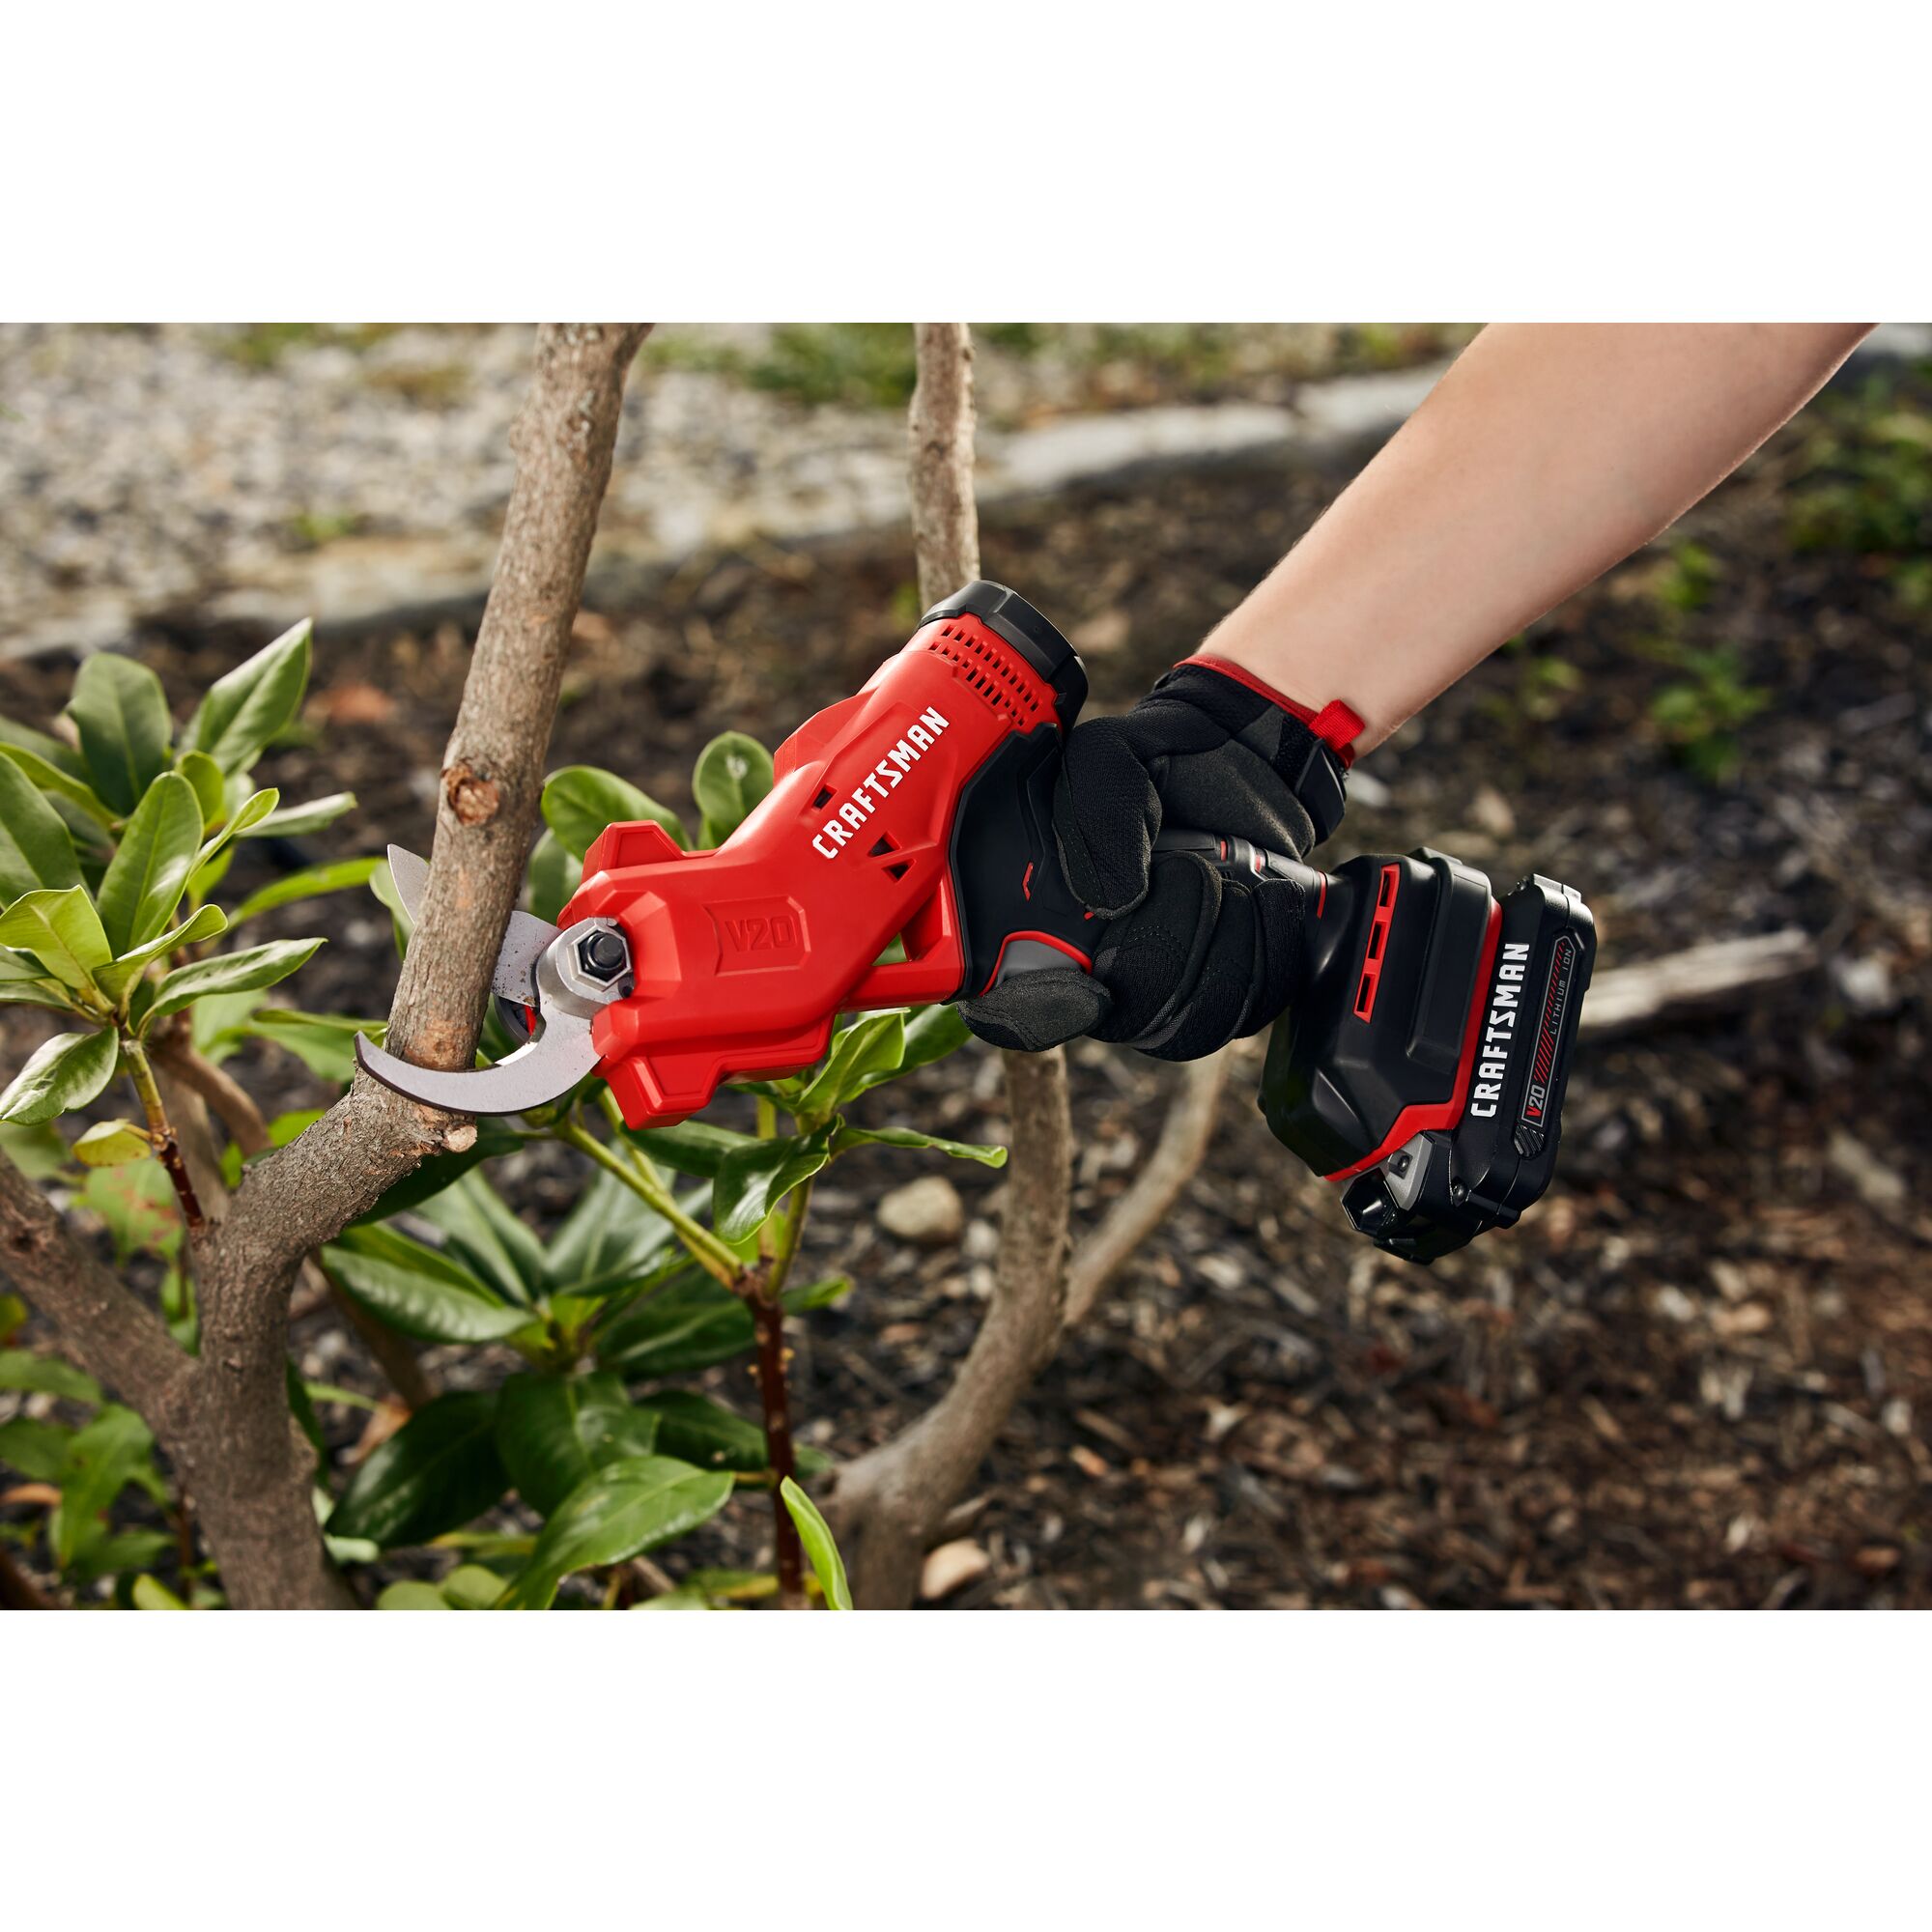 20 volt cordless pruner kit being used by a person to cut a branch outdoors.